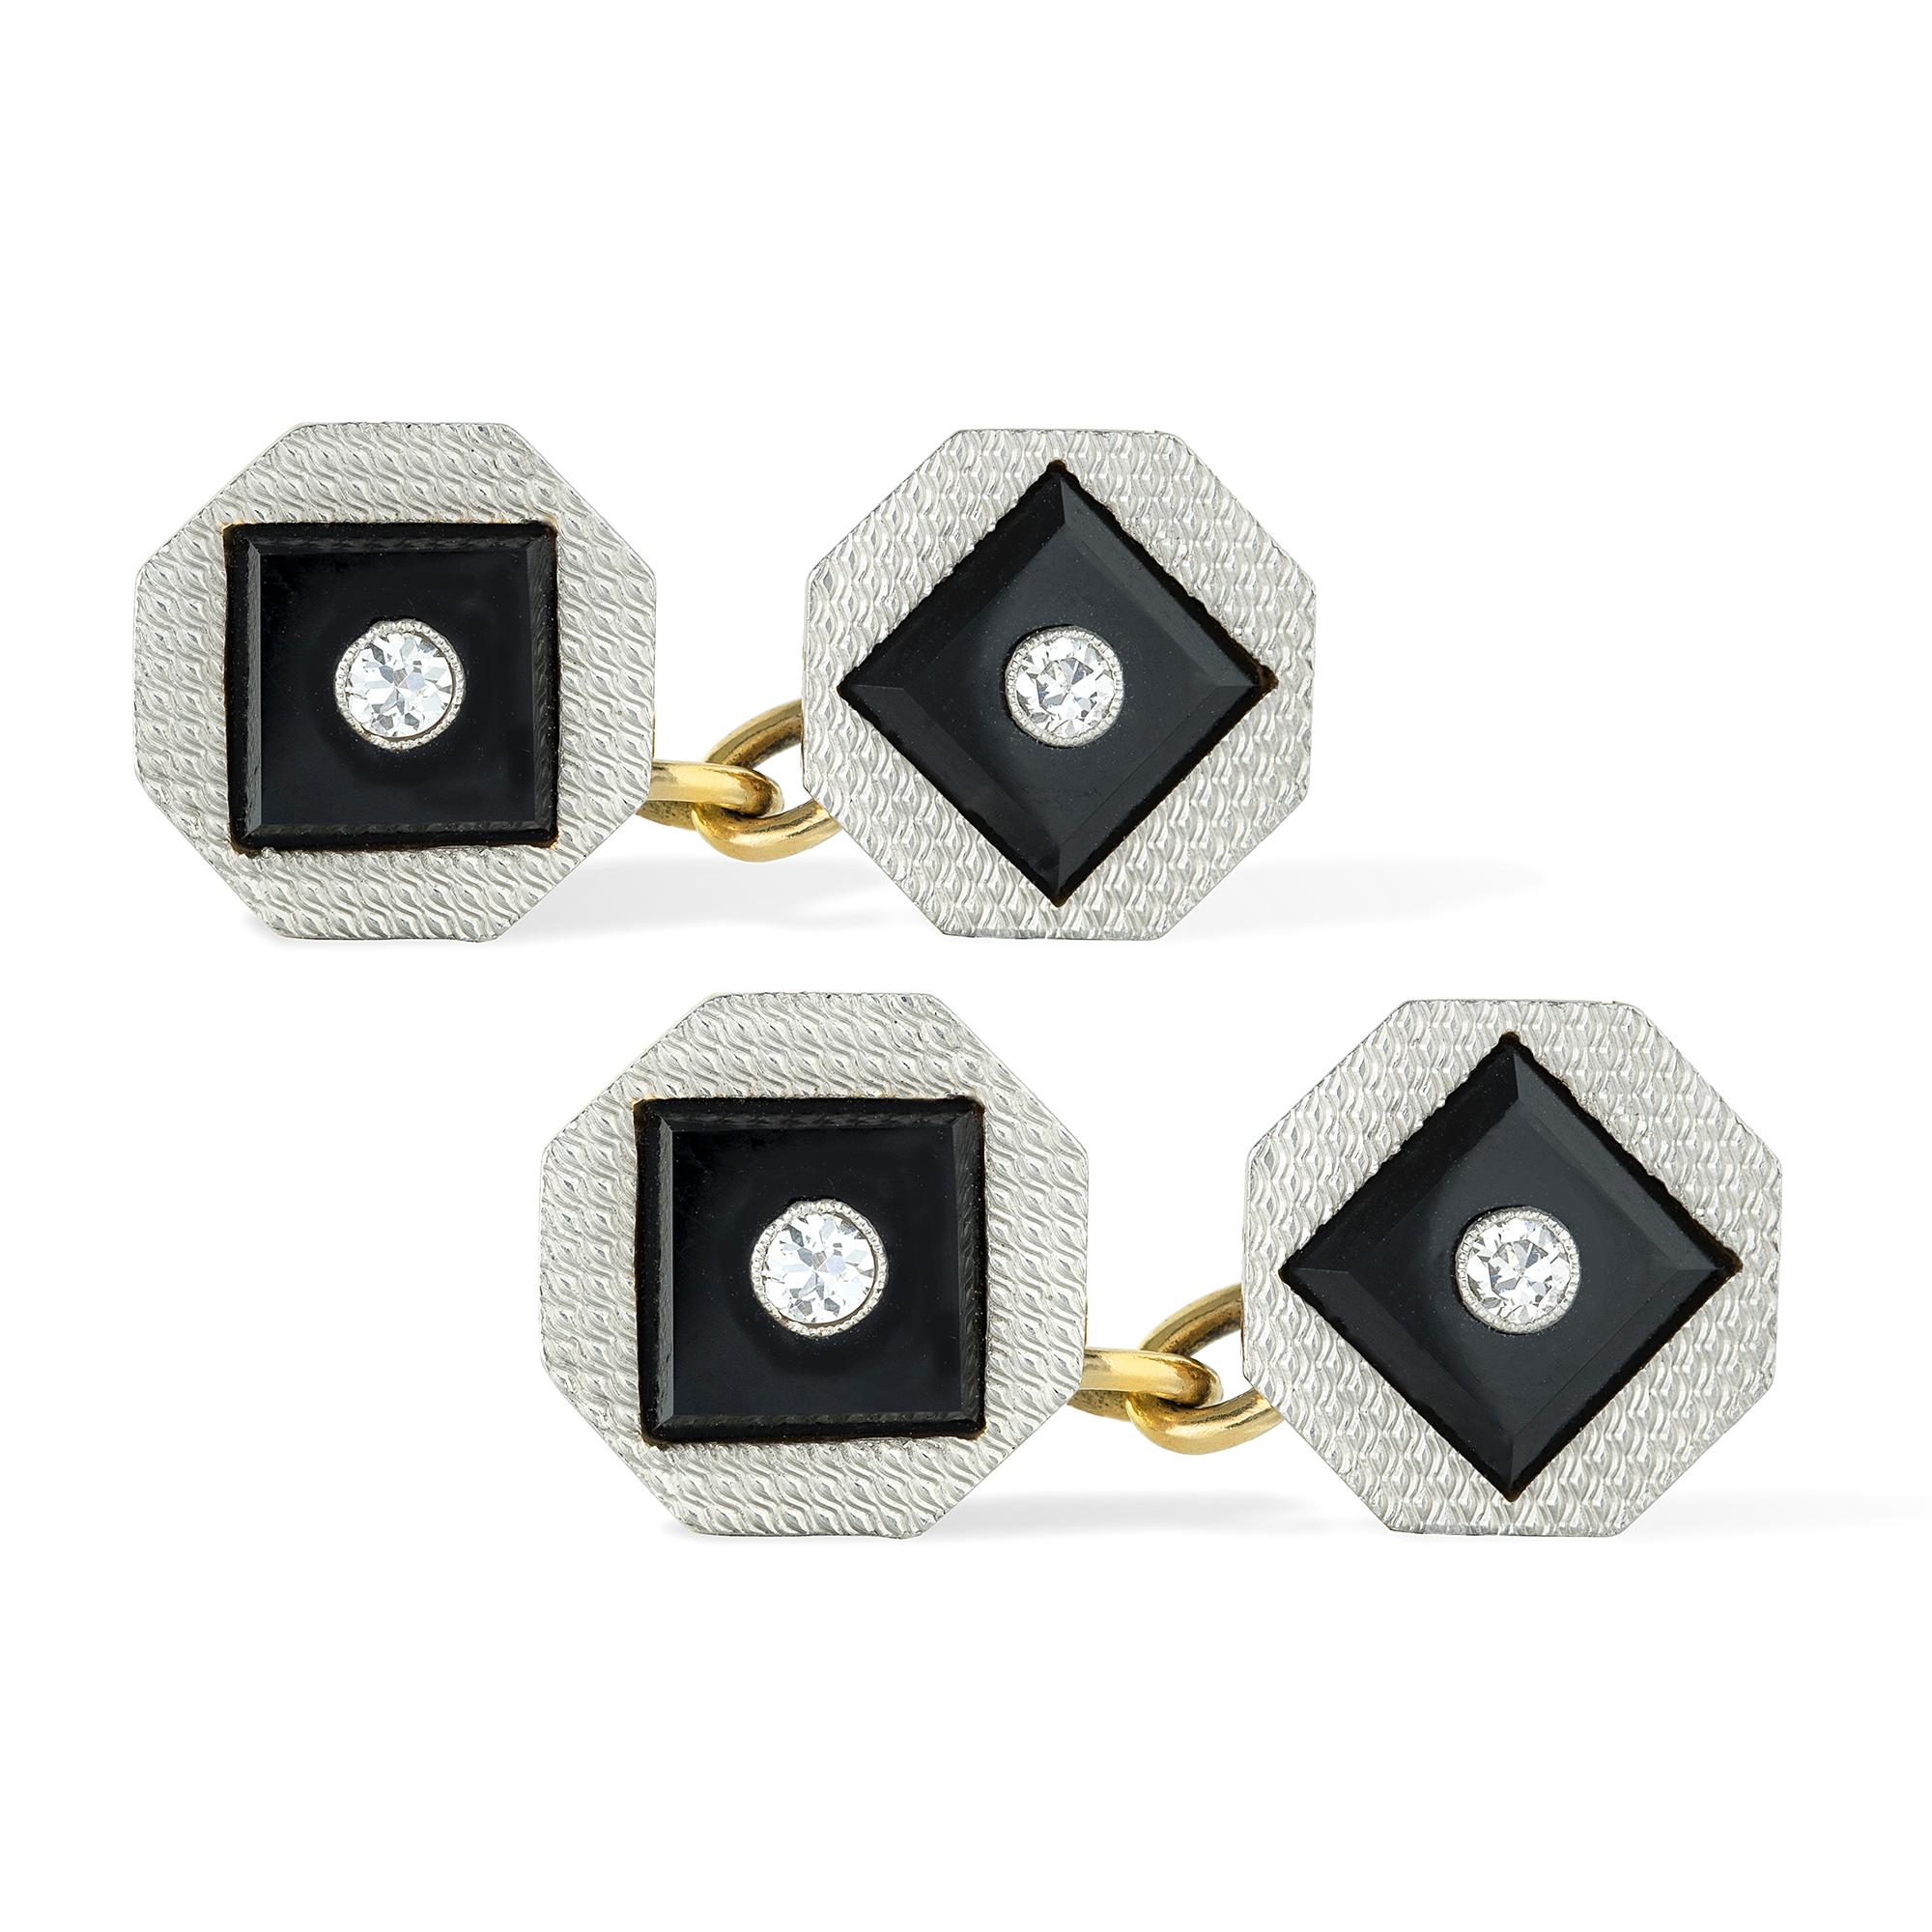 A Festival of Britain style onyx and diamond dress set, consisting of a pair of shirt studs, four buttons with yellow gold fittings and a pair of cufflinks, each octagonal-shaped plaque set with an onyx face and a round brilliant-cut diamond